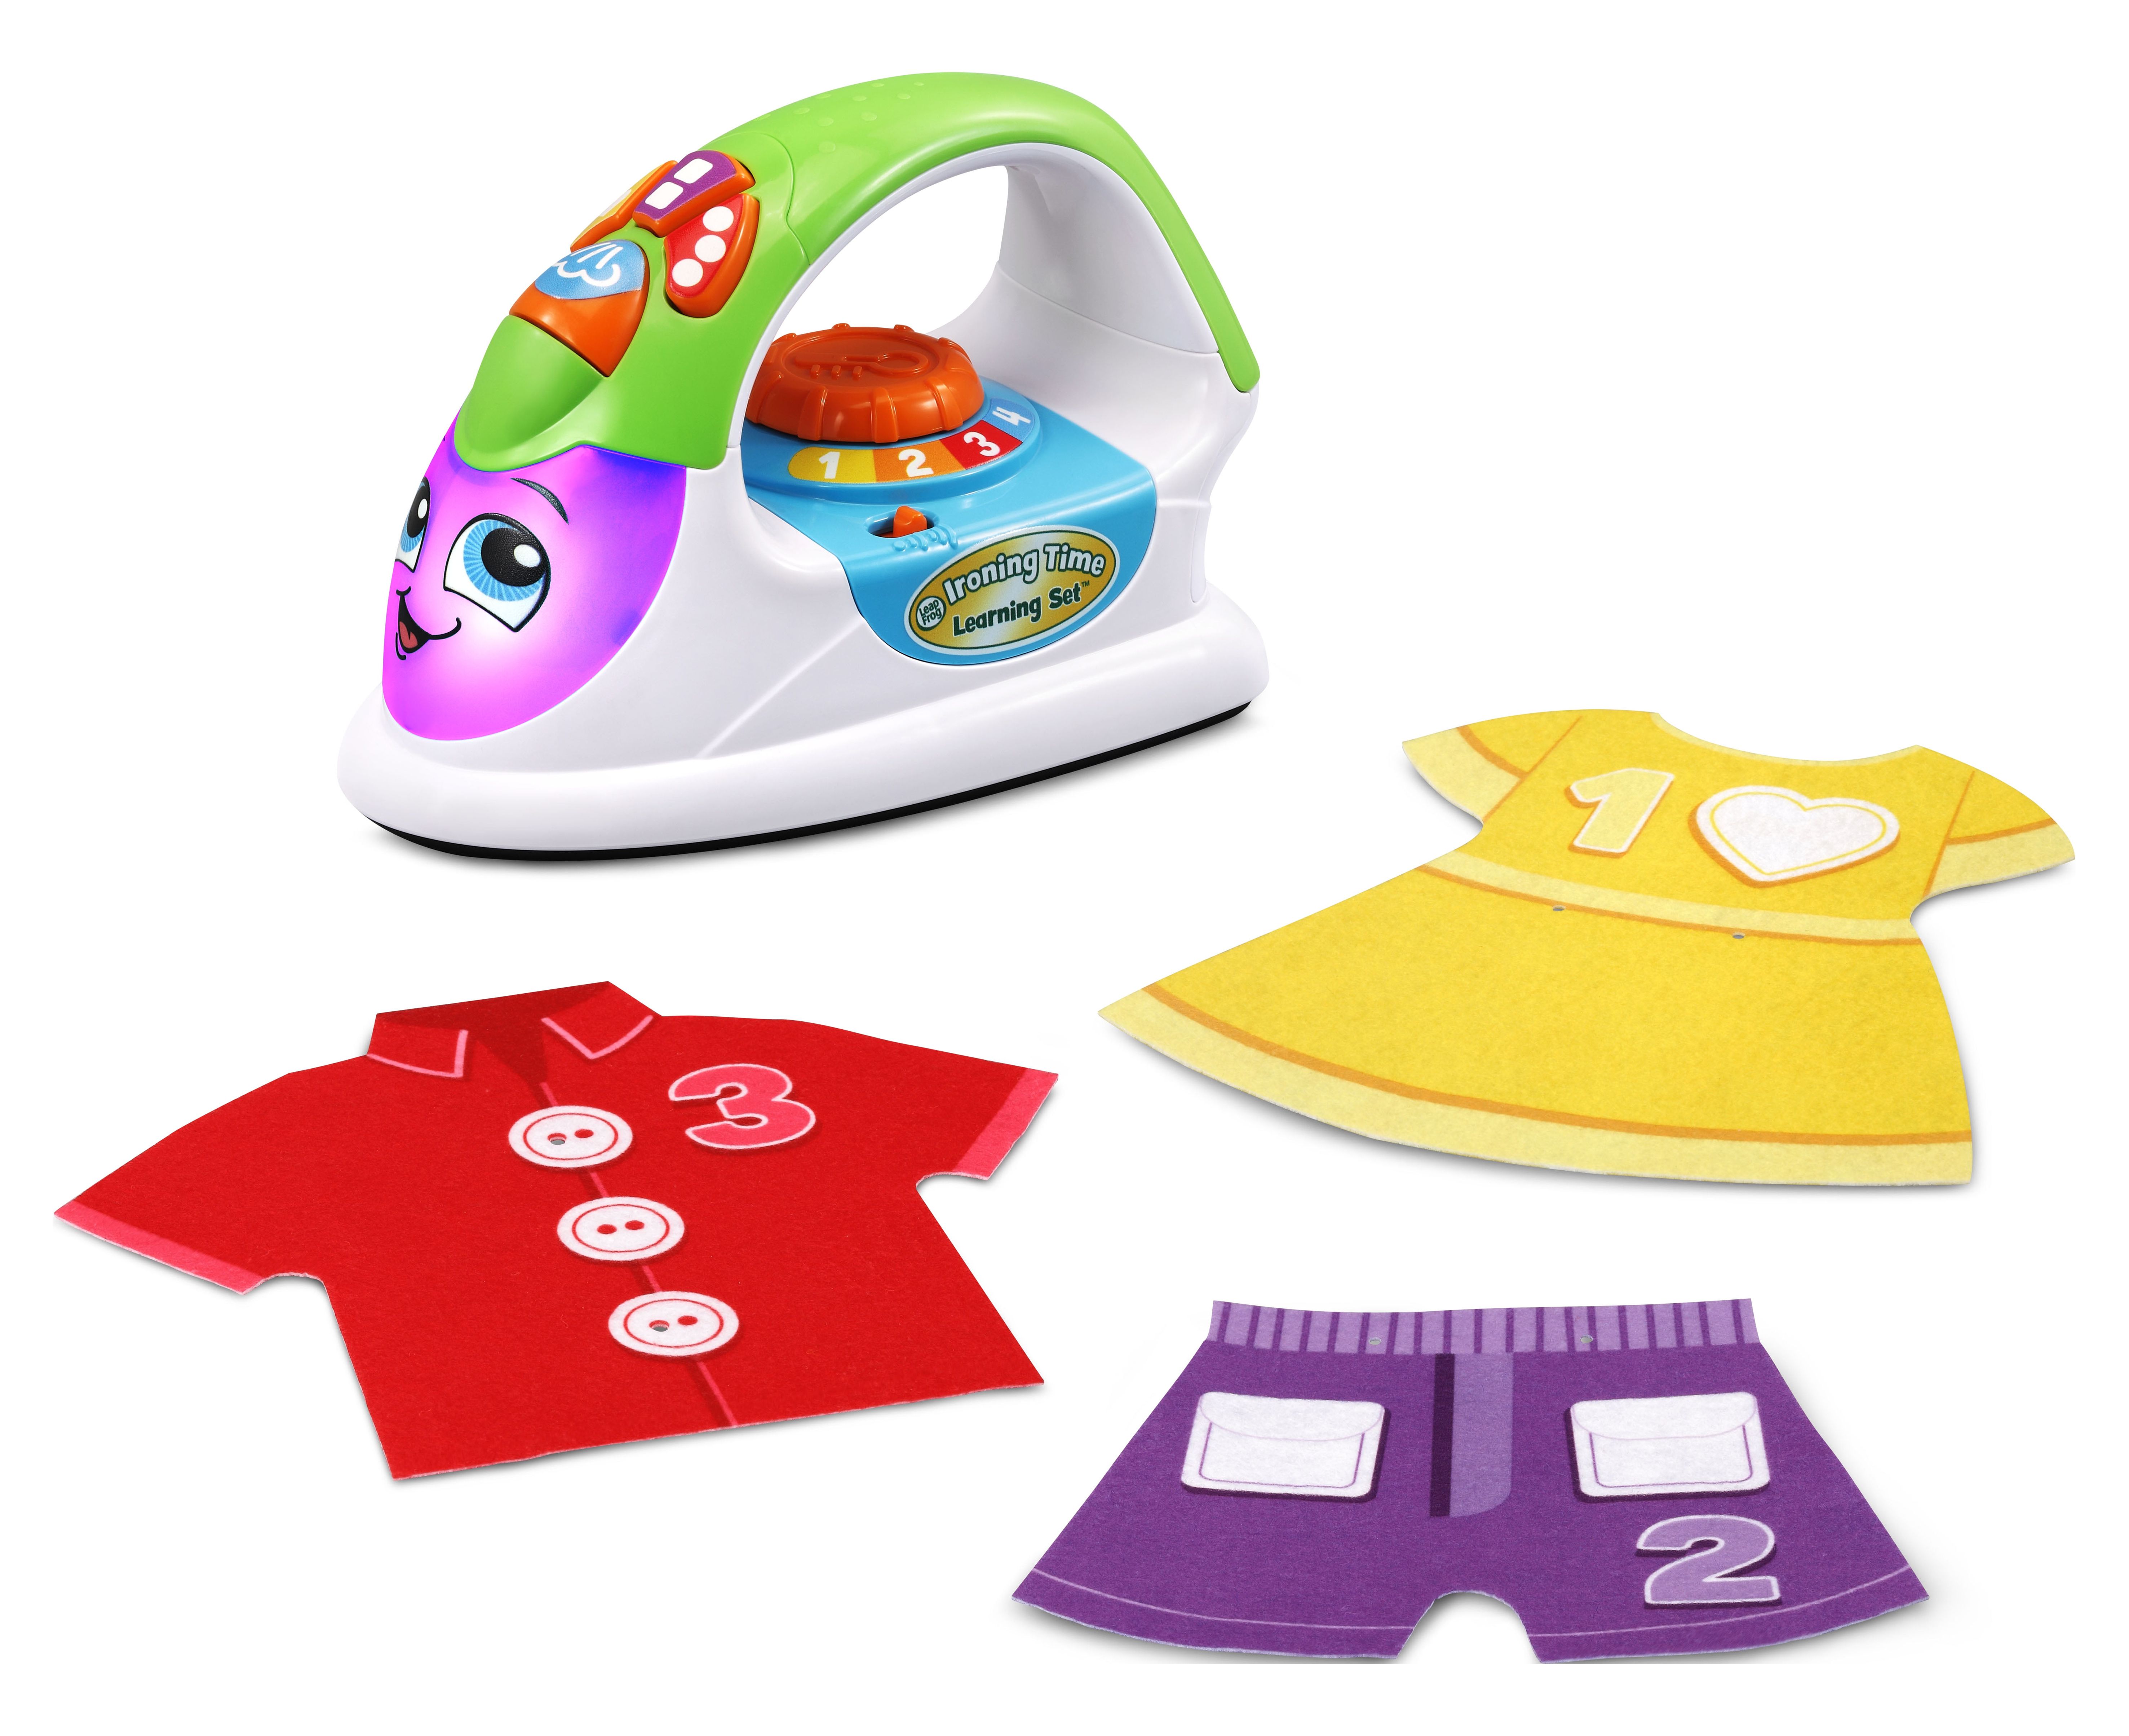 LeapFrog® Ironing Time Learning Set, Pretend Play Toy for Toddlers, Teaches Colors, Shapes - image 1 of 12